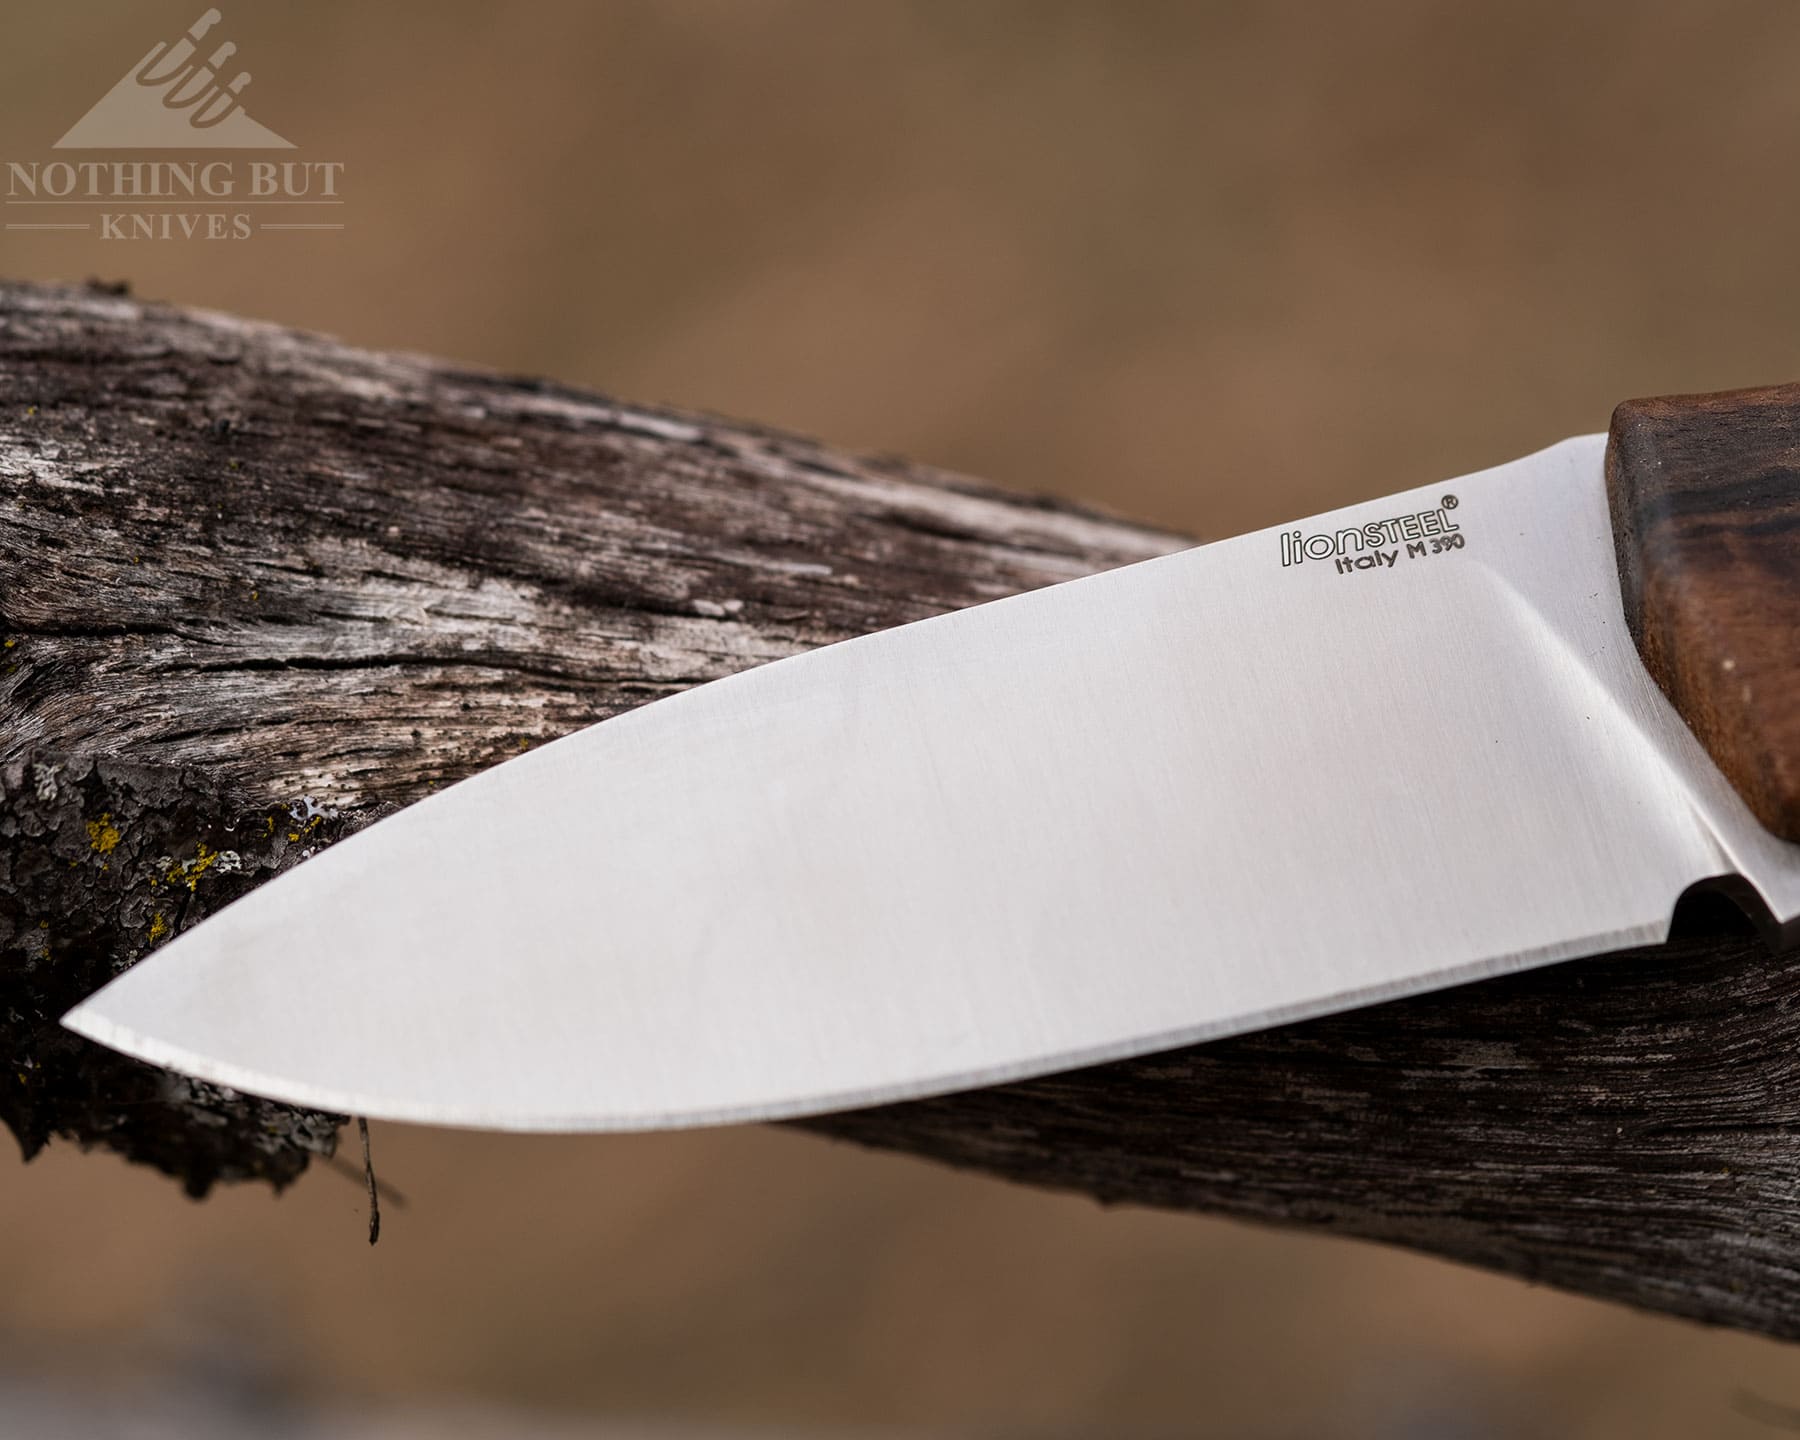 The blade of the M4 features a flat grind and a sharp edge. 